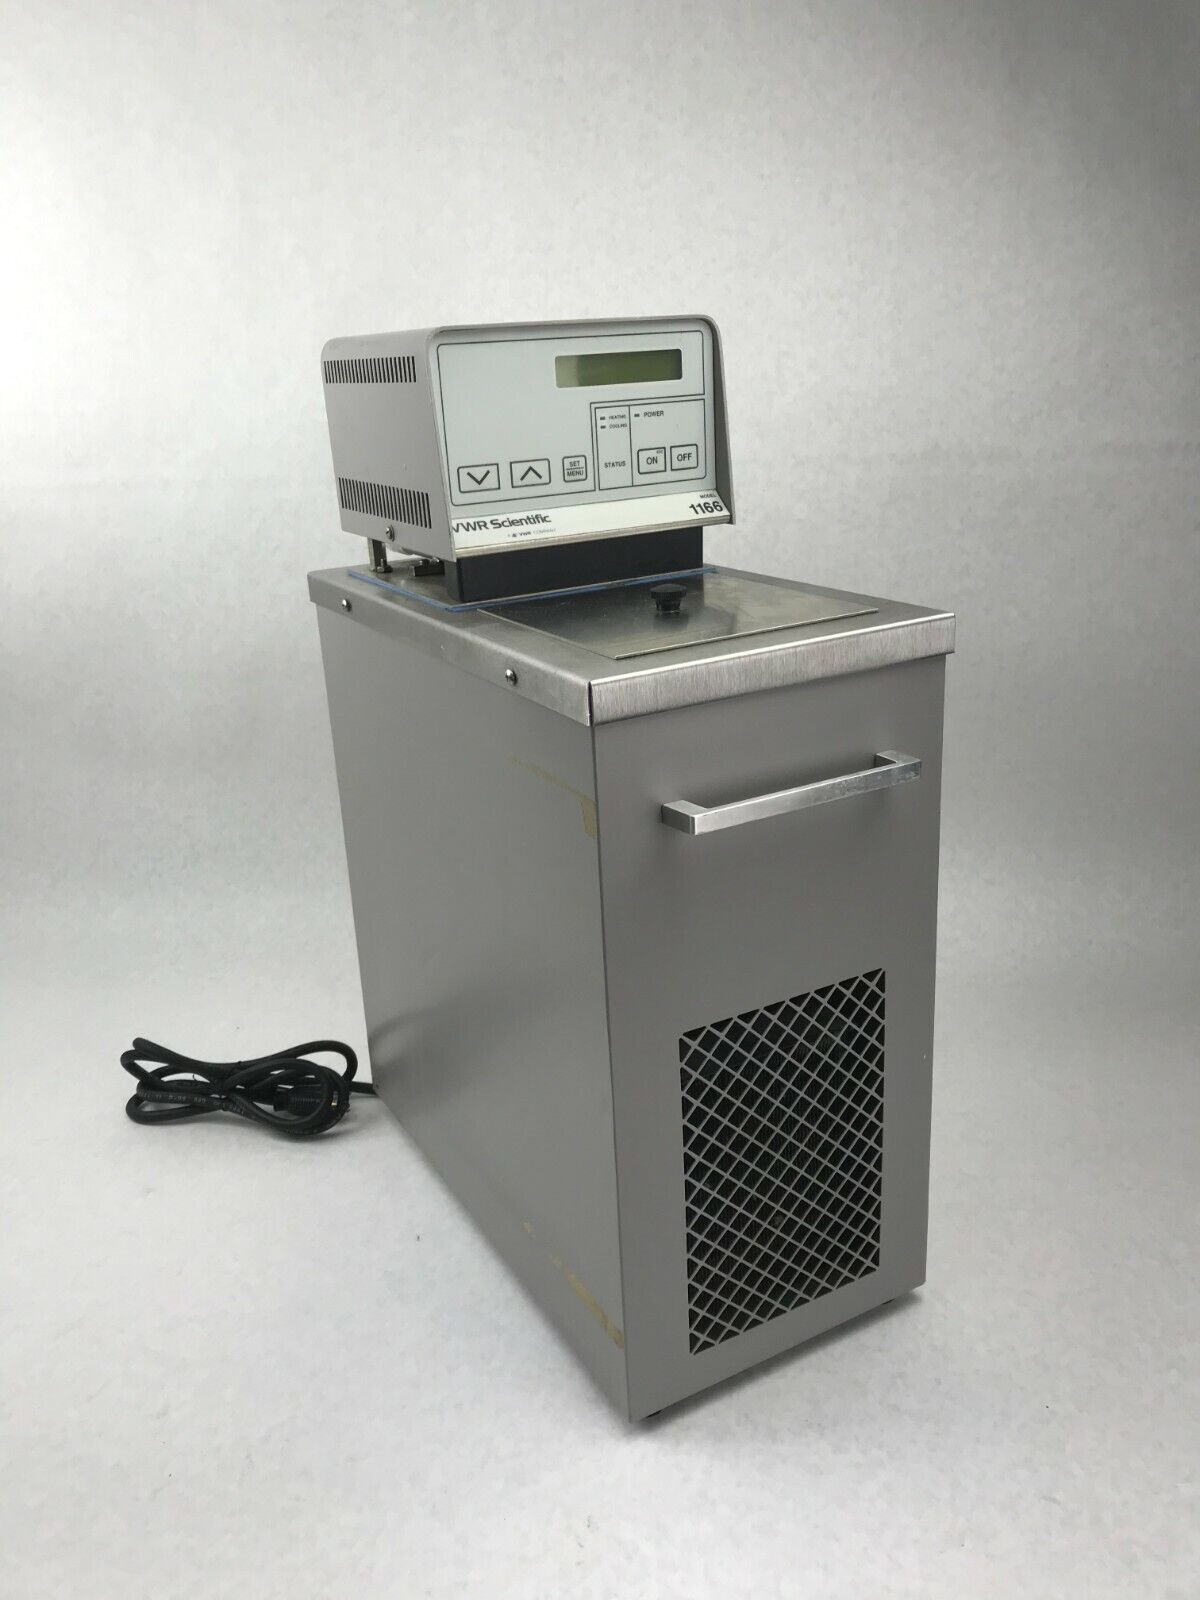 VWR Scientific Heated Refrigerated Circulating Chiller Model 1166 - No Power